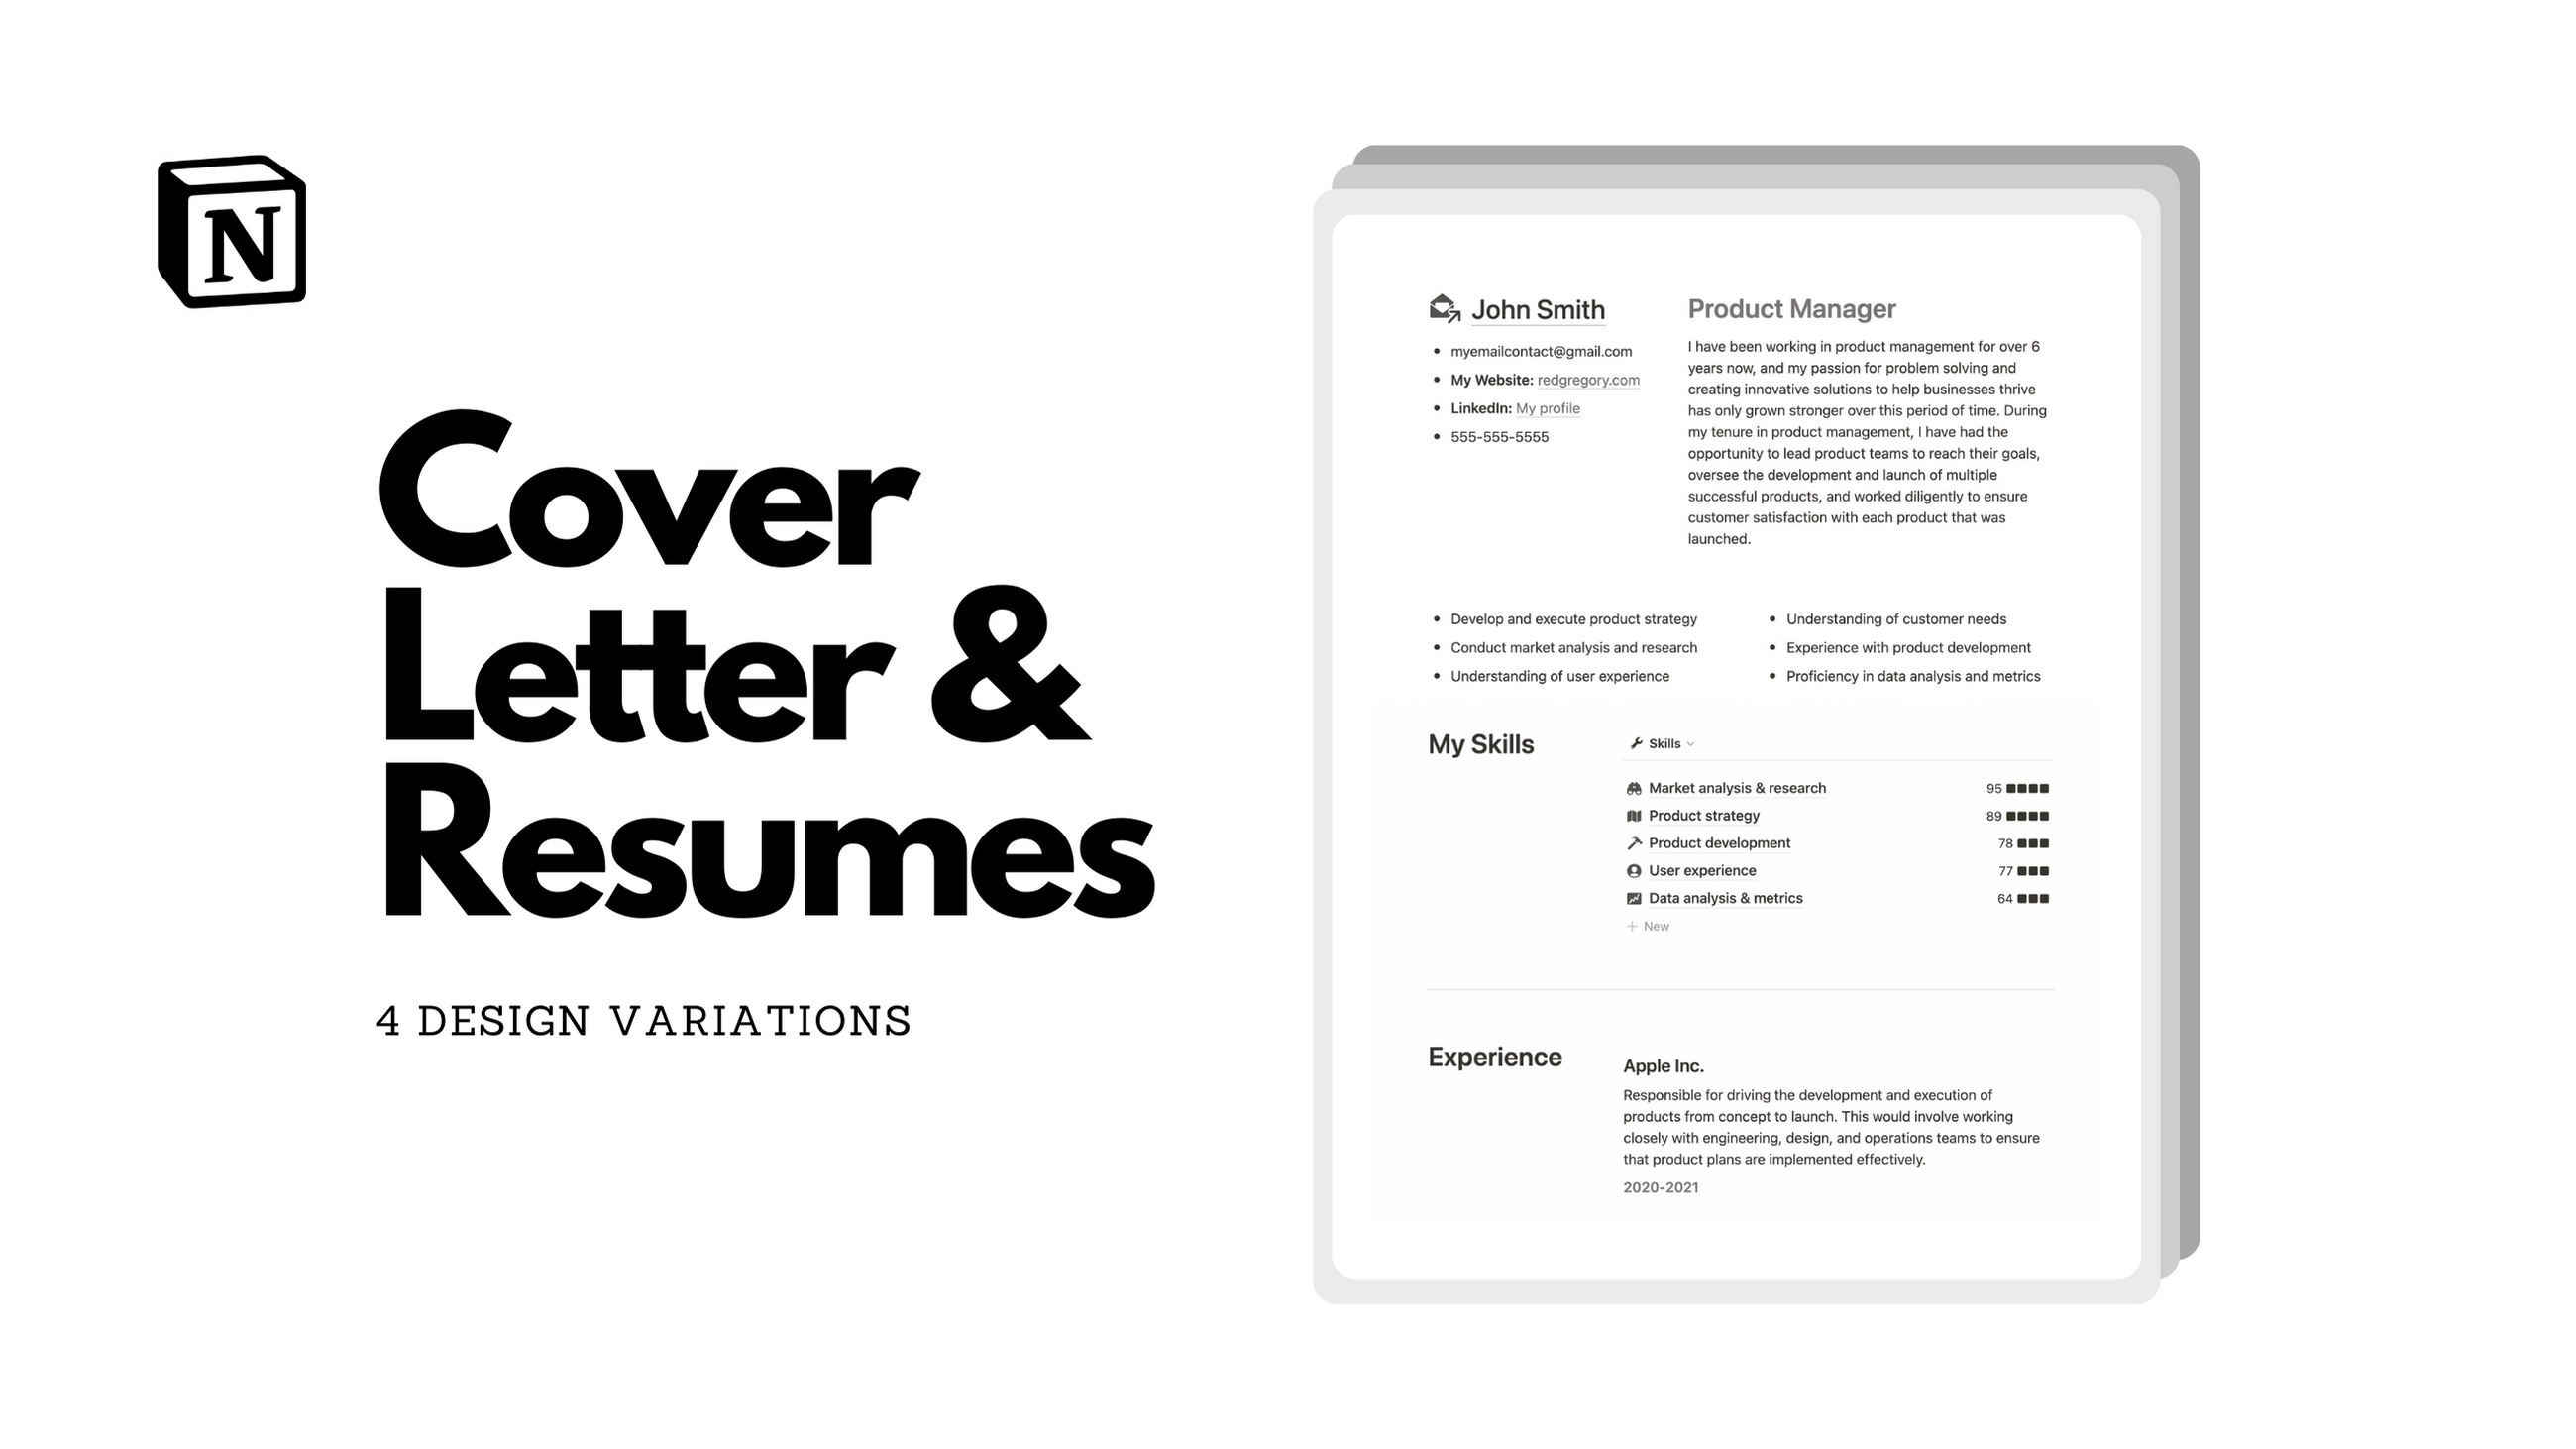 Cover Letter & Resumes